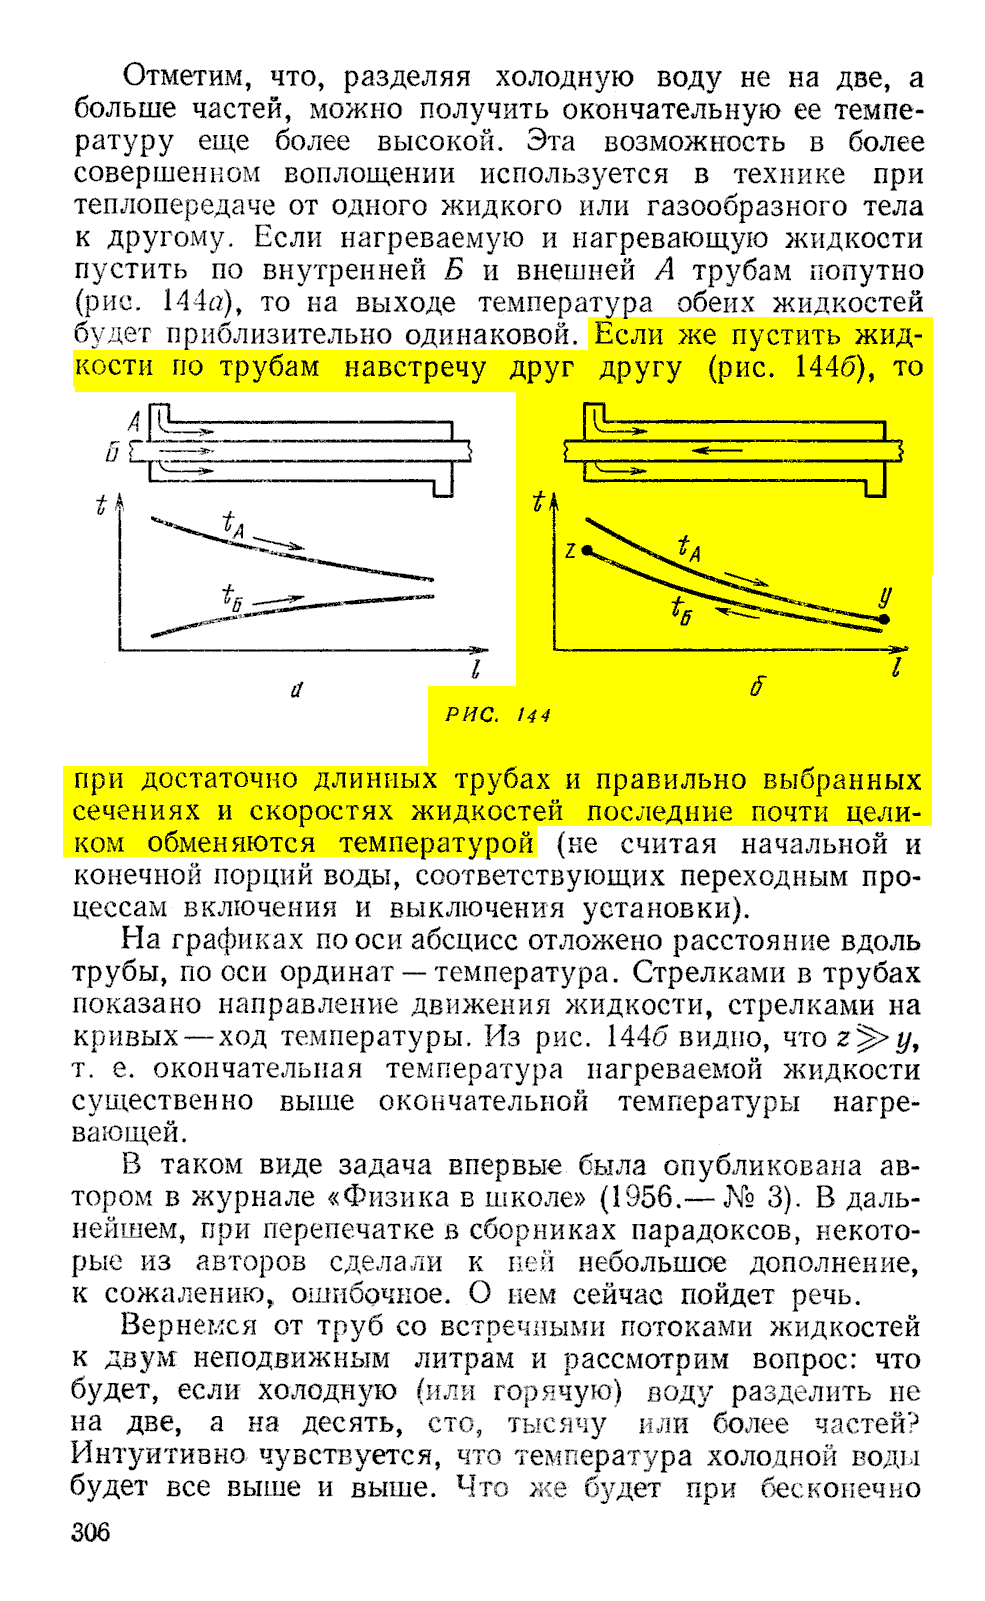 If to start up liquids in tubes along the lines towards each other (fig. 144 b), then at  enough long tubes both correctly chosen sections and speeds of liquids the last almost entirely will exchange temperature